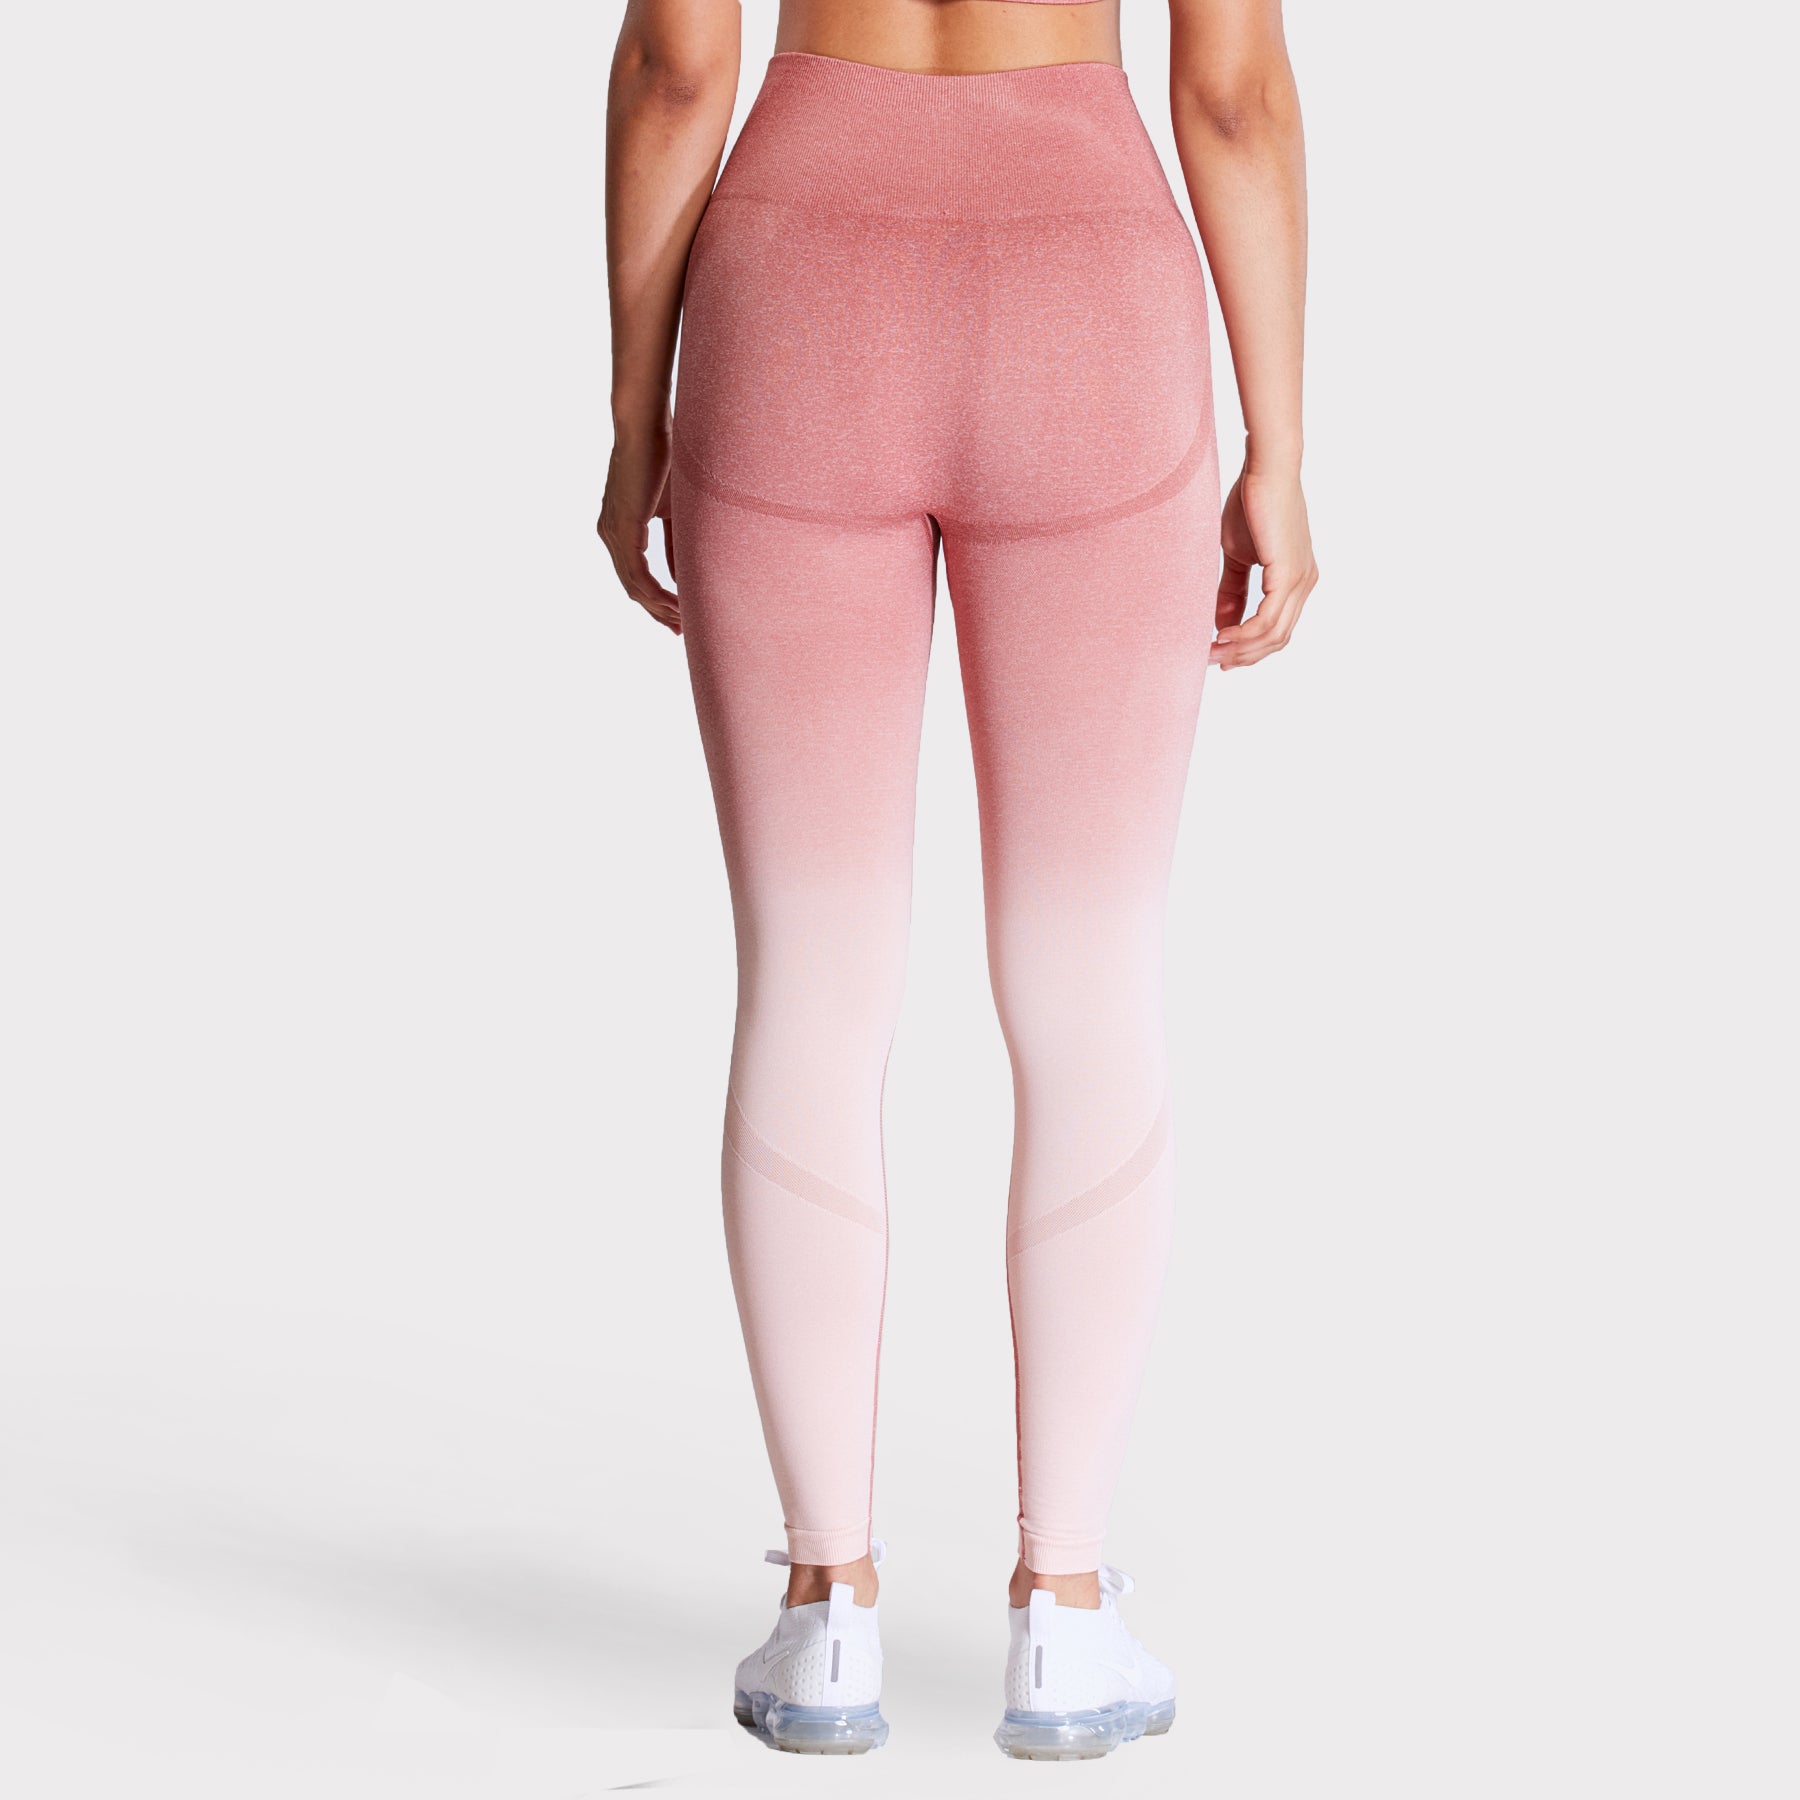 Nepoagym Women New Ombre Seamless Leggings Compression High